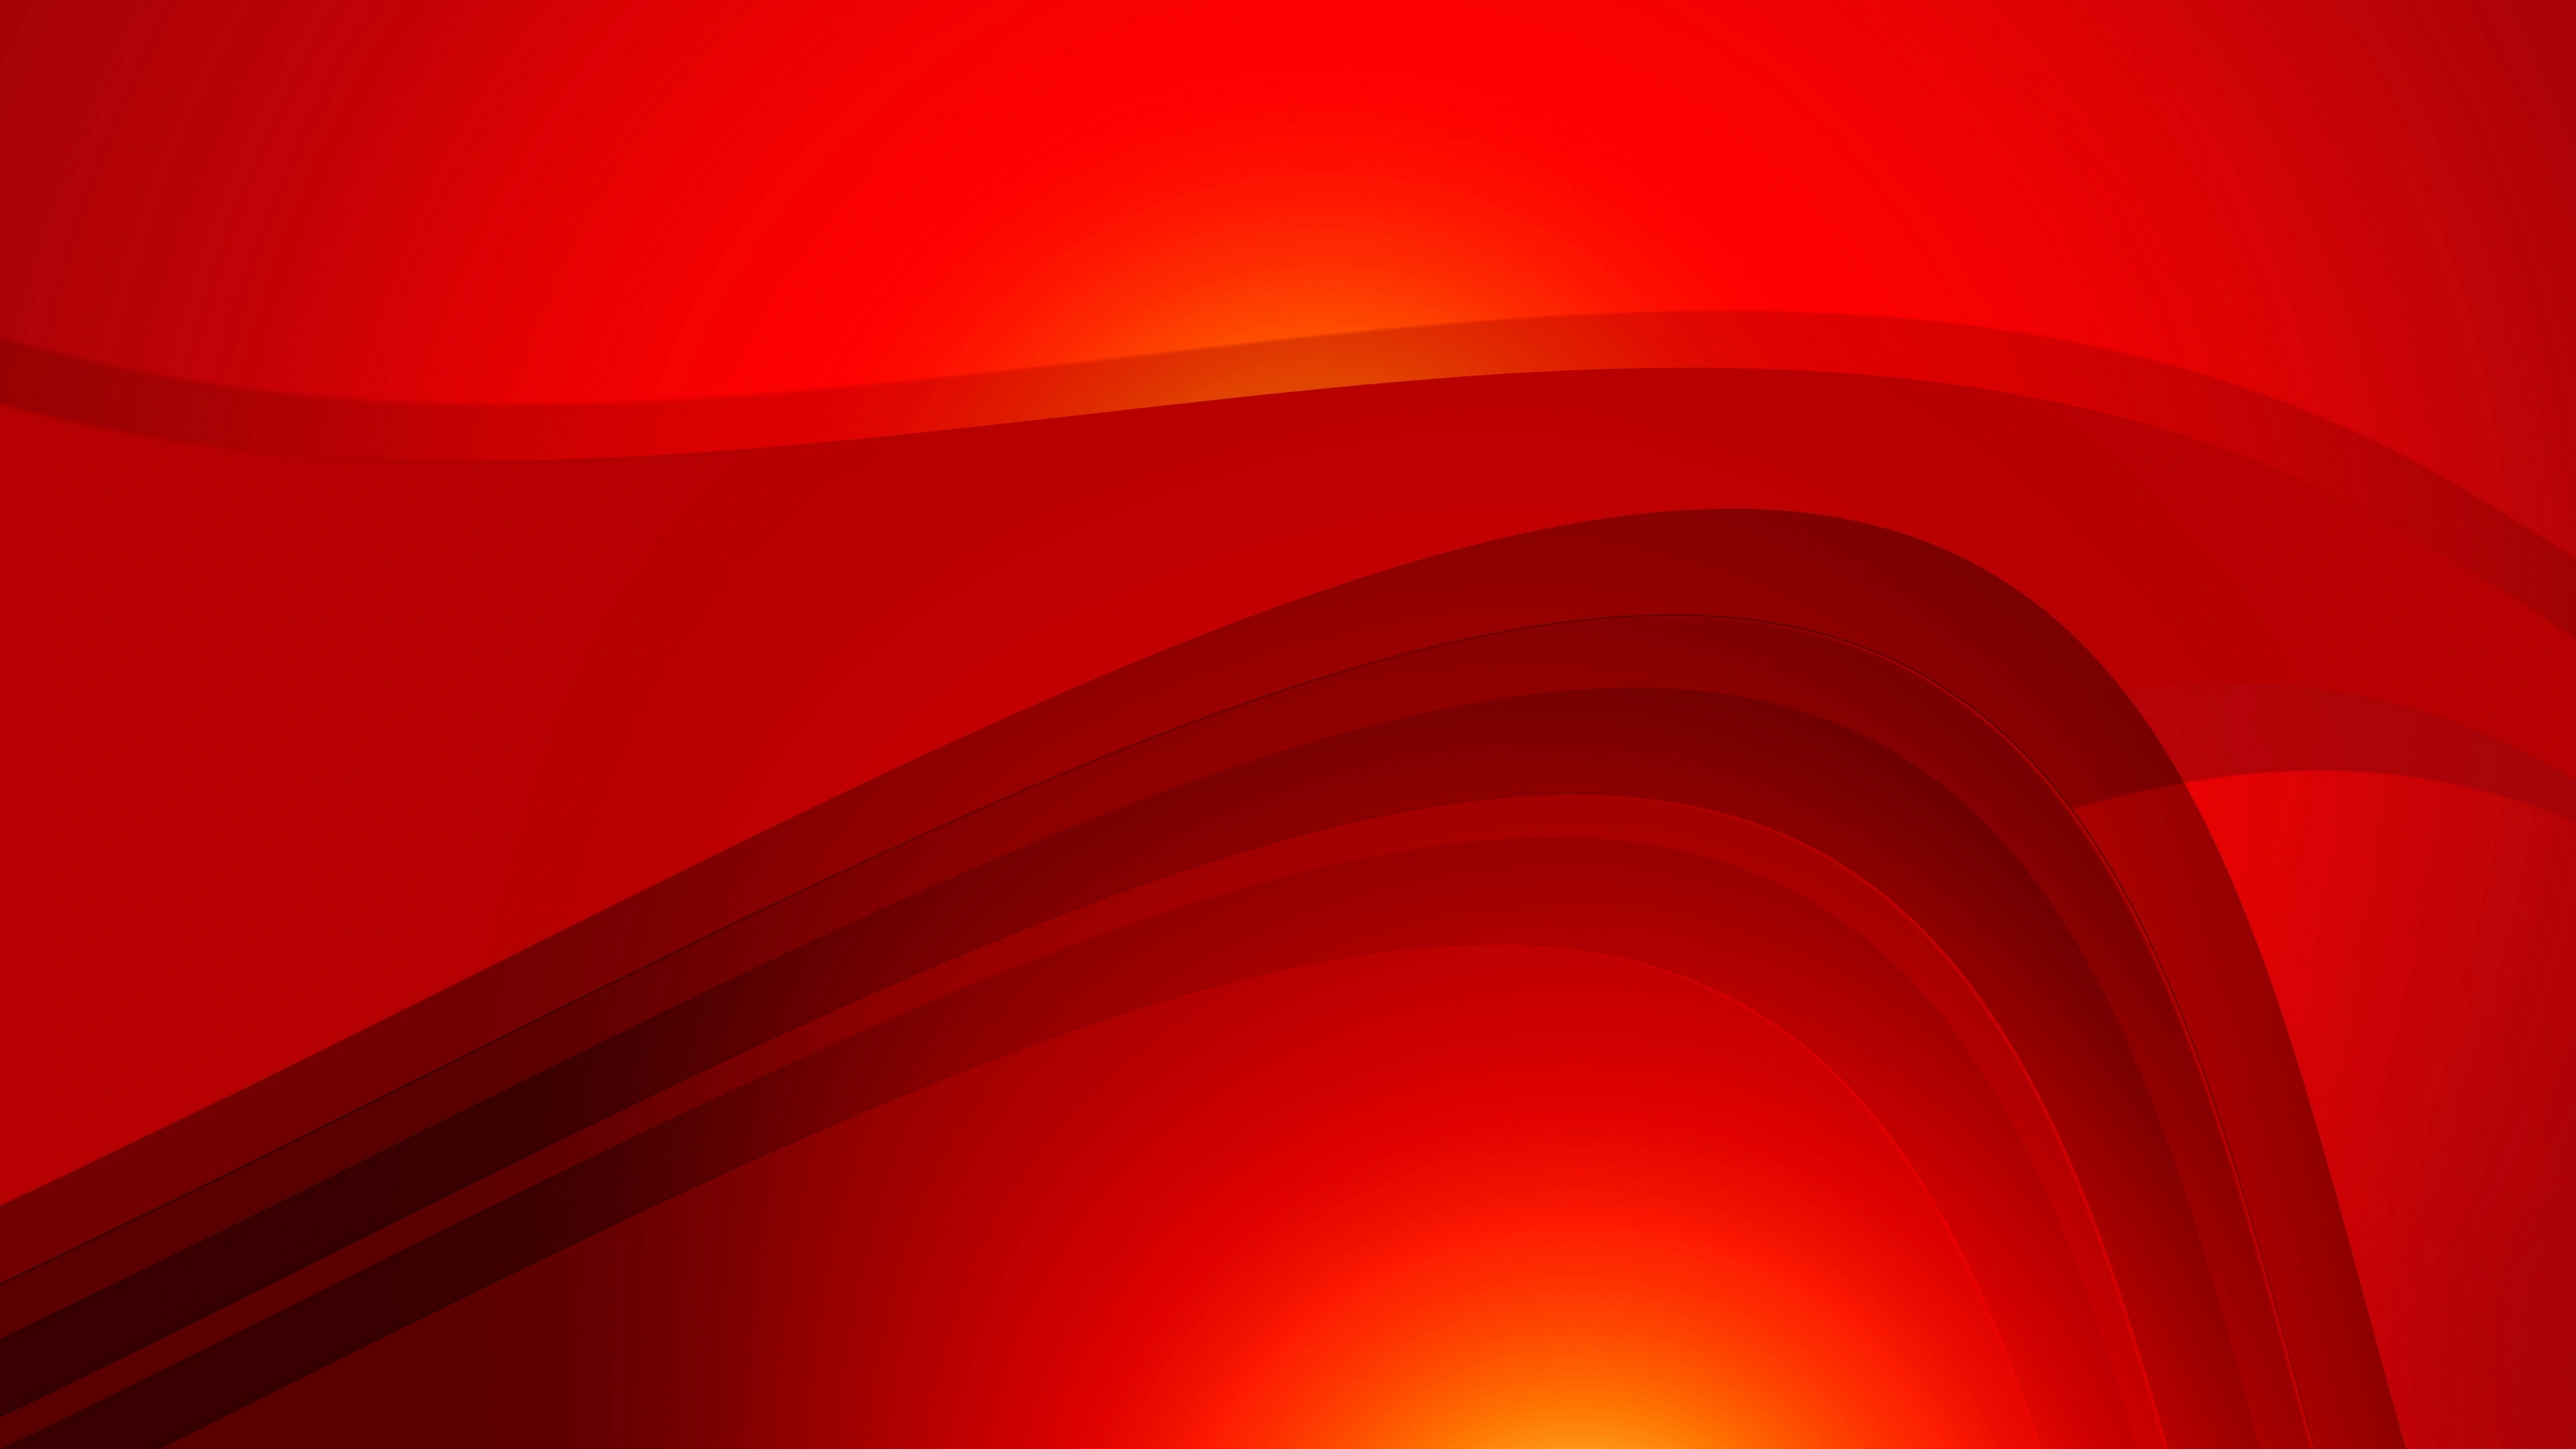 abstraction waves lines red 4k 1539369984 - abstraction, waves, lines, red 4k - Waves, Lines, Abstraction